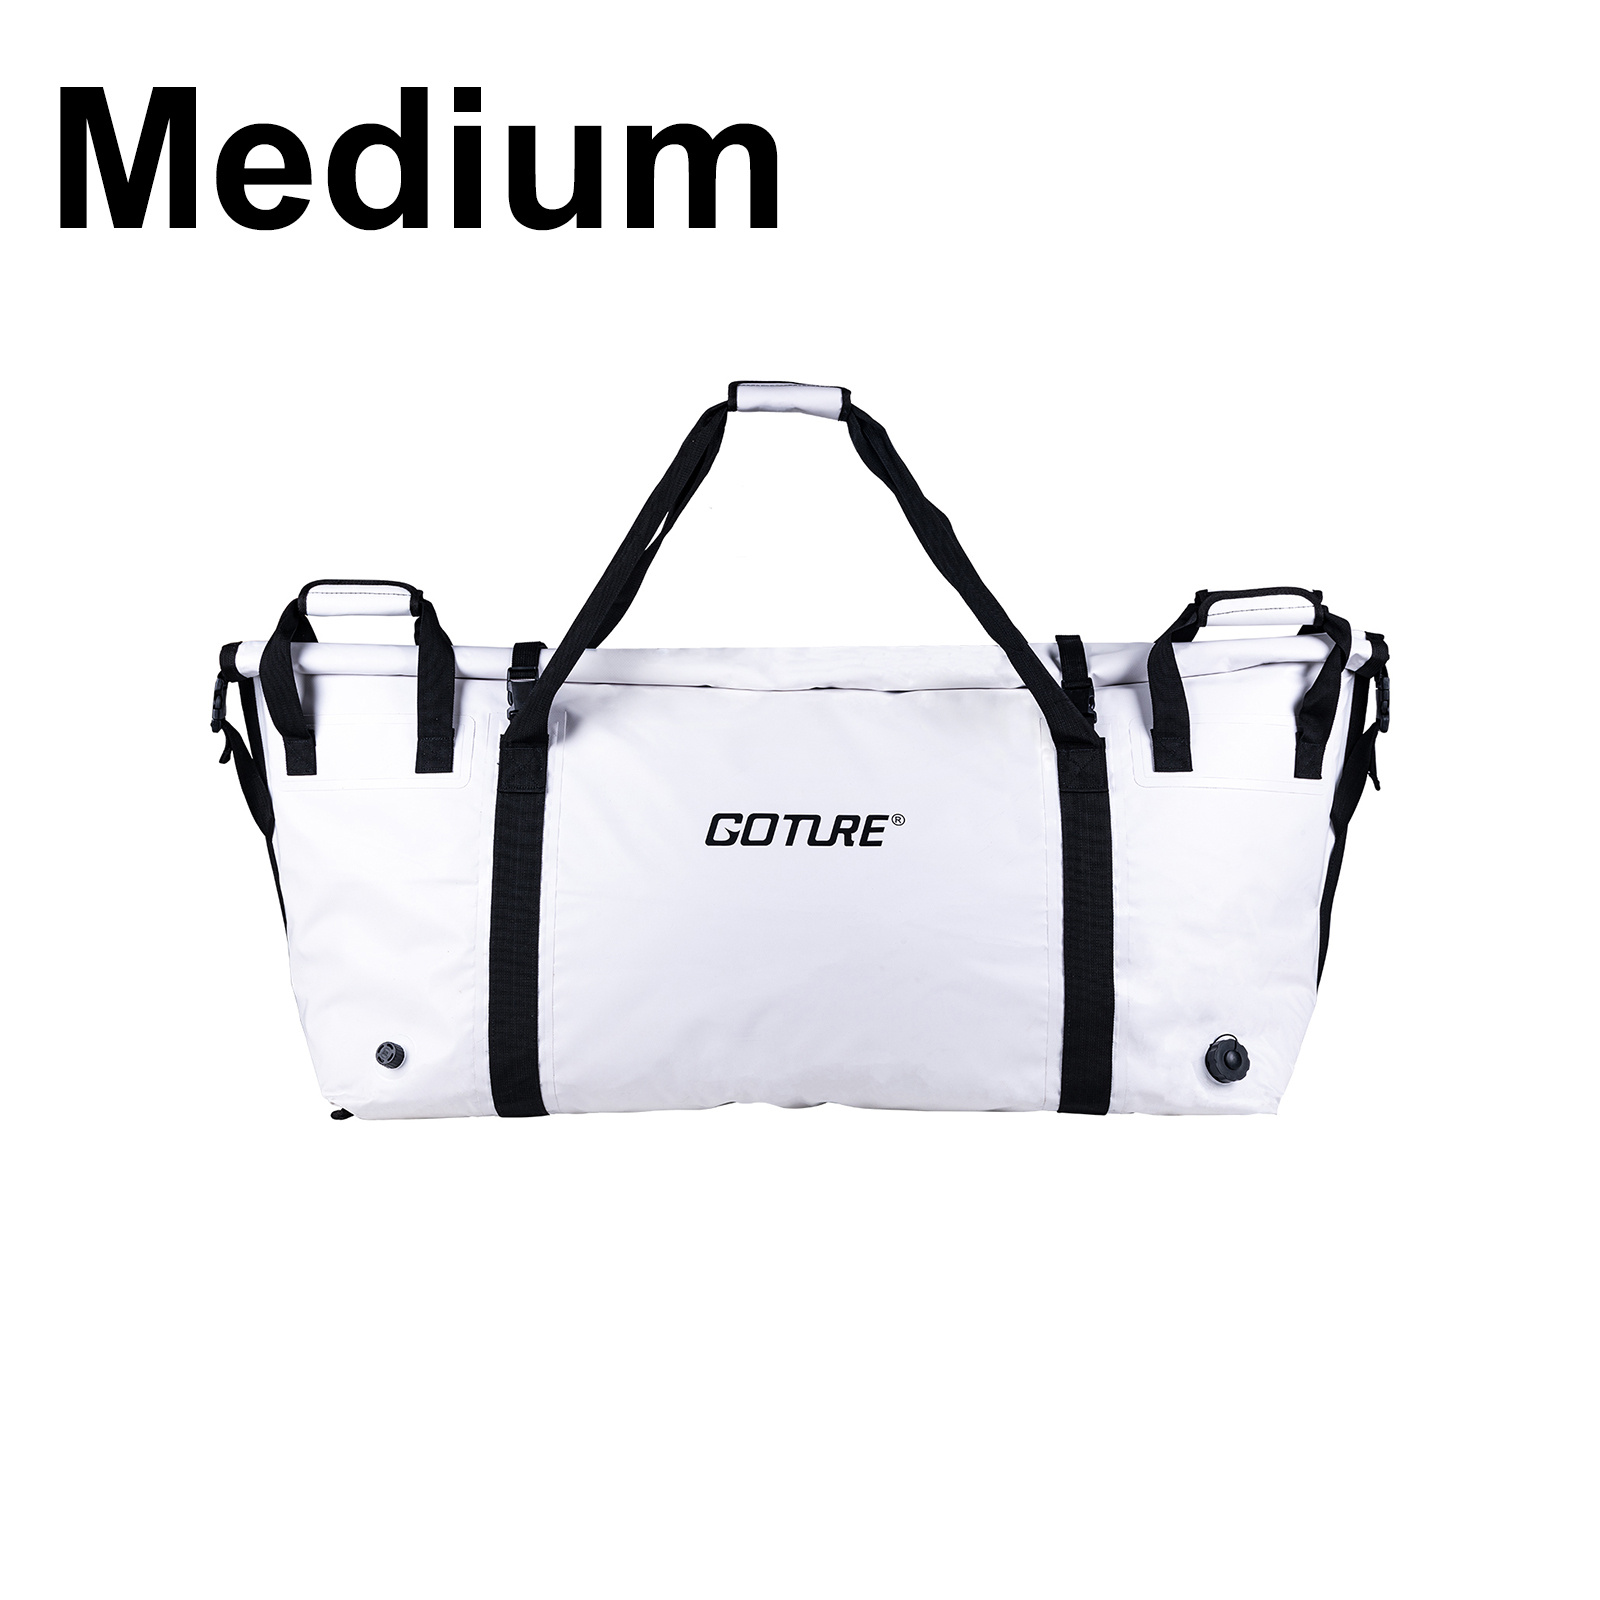 Fish Bag, Insulated Fishing Cooler, Leakproof Kill Bags, 41x16.5, White,  Waterproof Collapsible Ice Chest, for Catfish, Salmon, Trout, Bass, Kayak,  Travel, Outdoor, Camping, Catch Gear